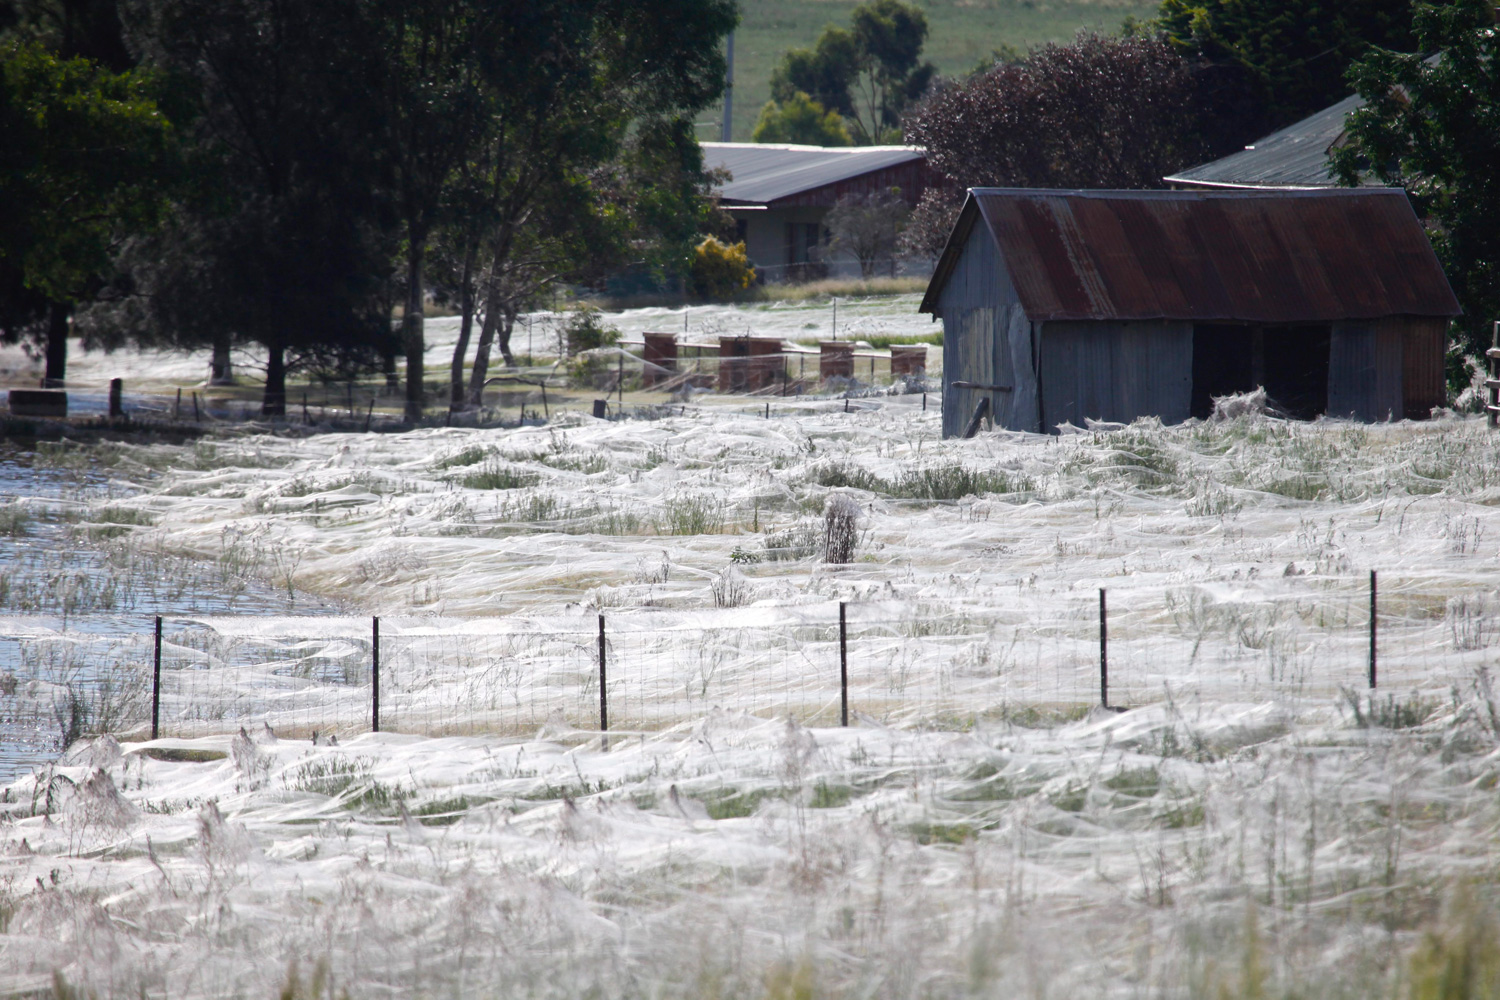 March 6, 2012. Thousands of spiders build new webs after floodwaters forced them to move to higher grounds in Wagga Wagga, New South Wales, Australia.